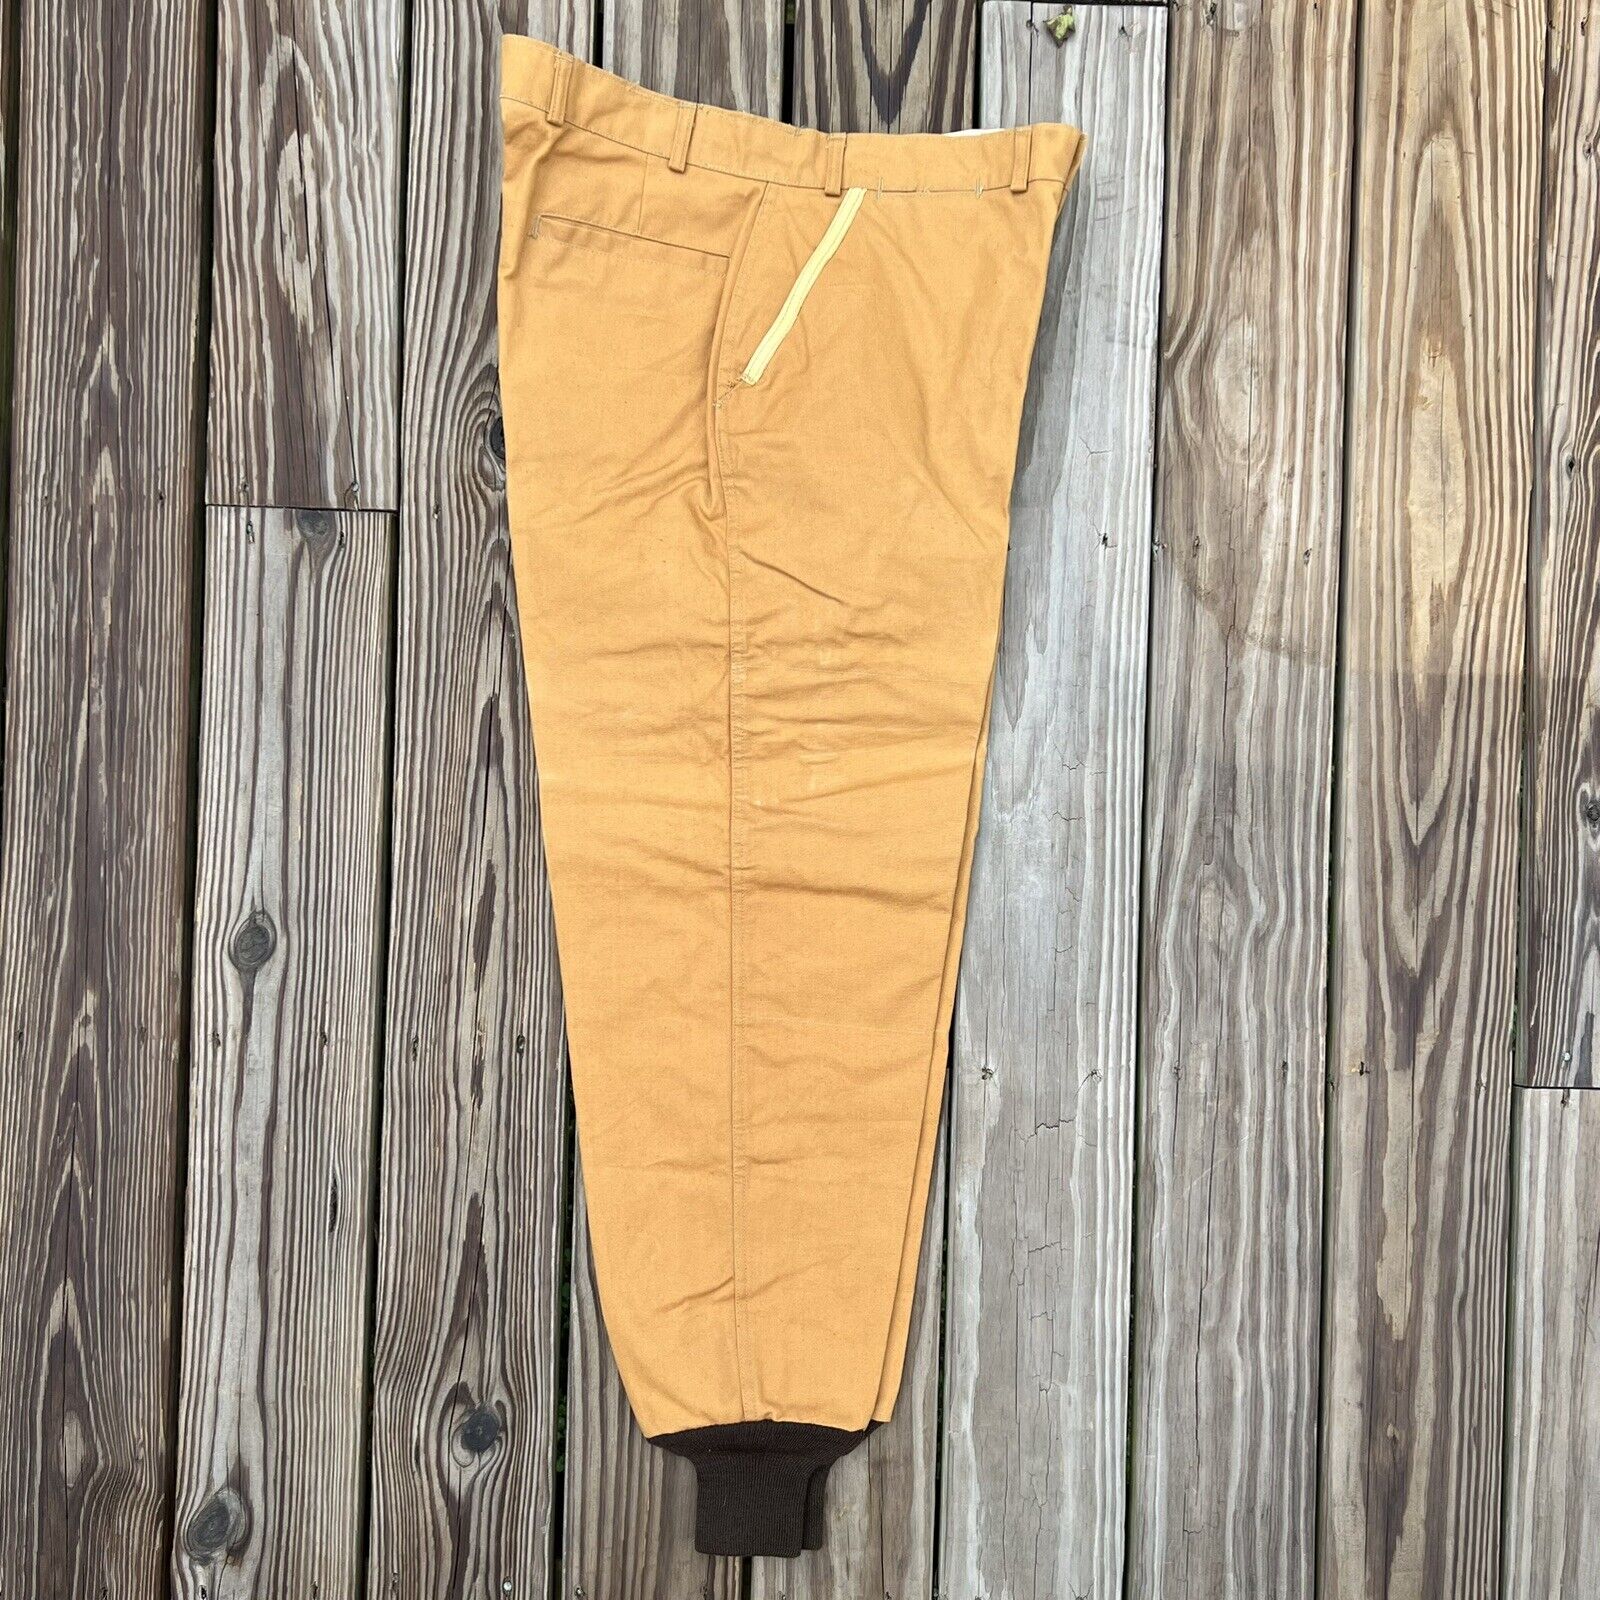 Cumberland Tapatco Canvas Hunting Pants Sears Army Duck Fishing Vtg Mens 38 x 31